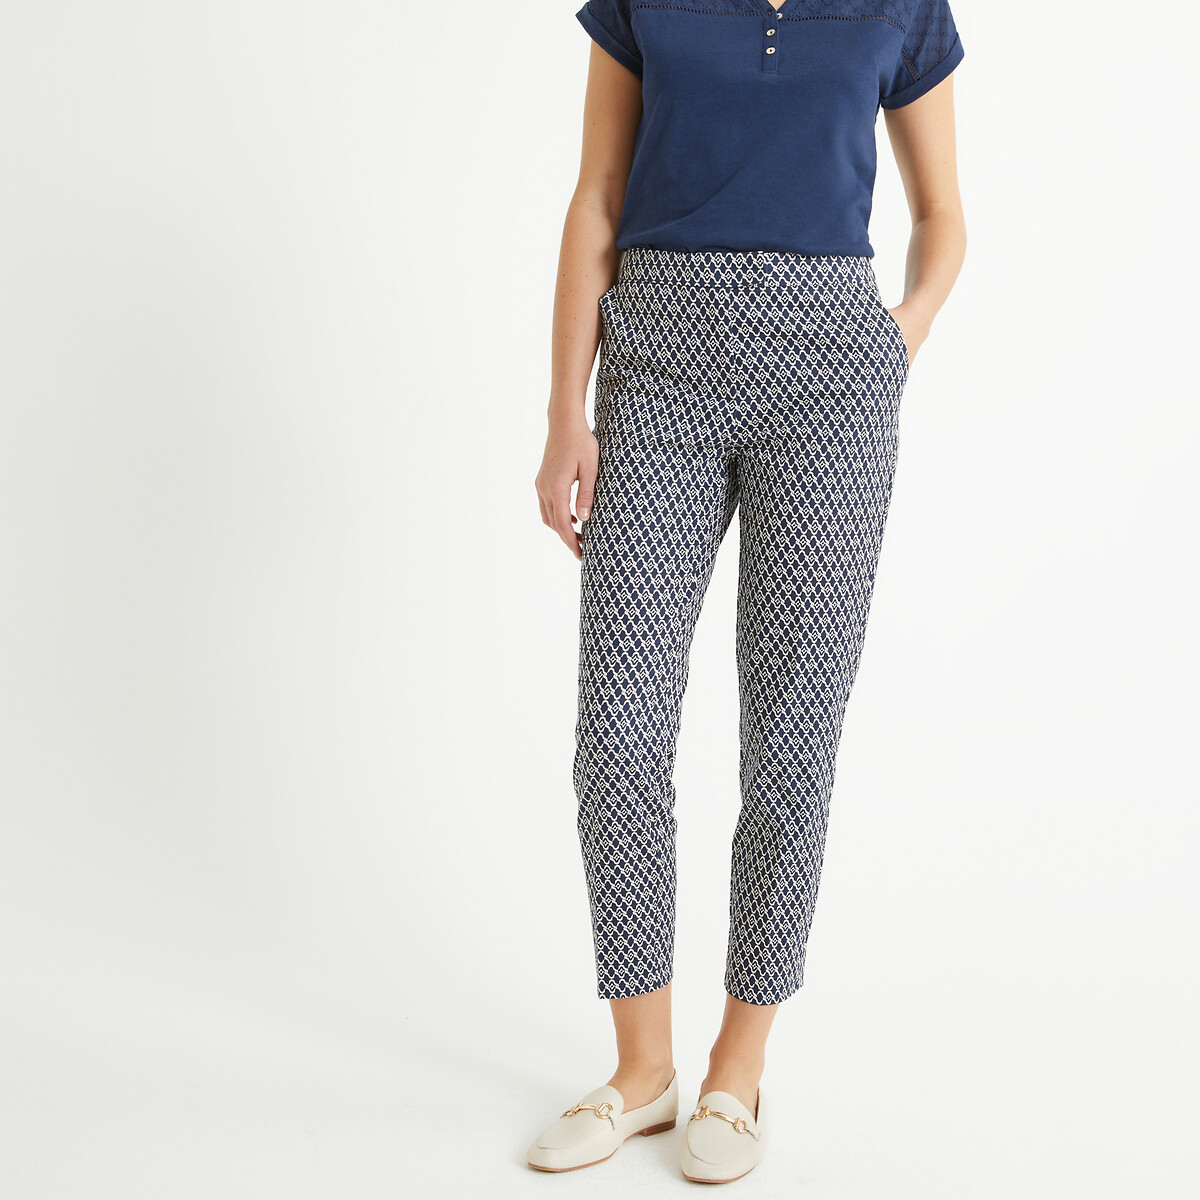 Graphic Print Peg Trousers in Cotton, Length 26.5"